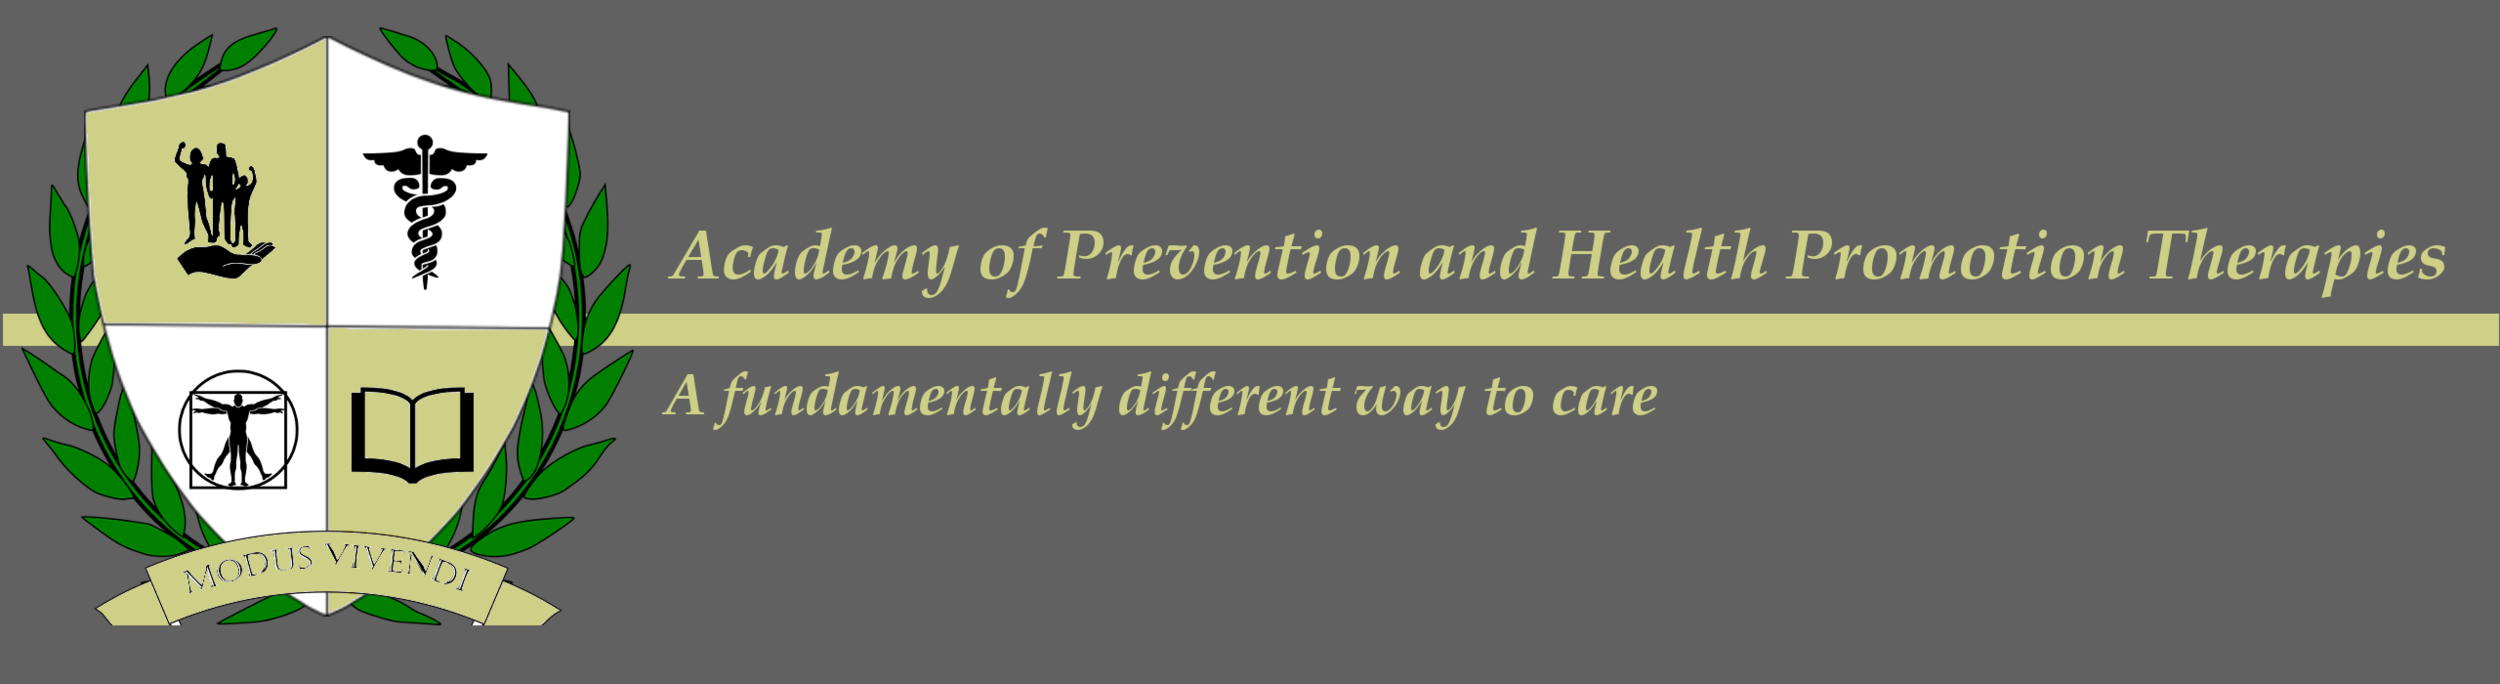 APPLIED PREVENTION &amp; HEALTH PROMOTION THERAPIES